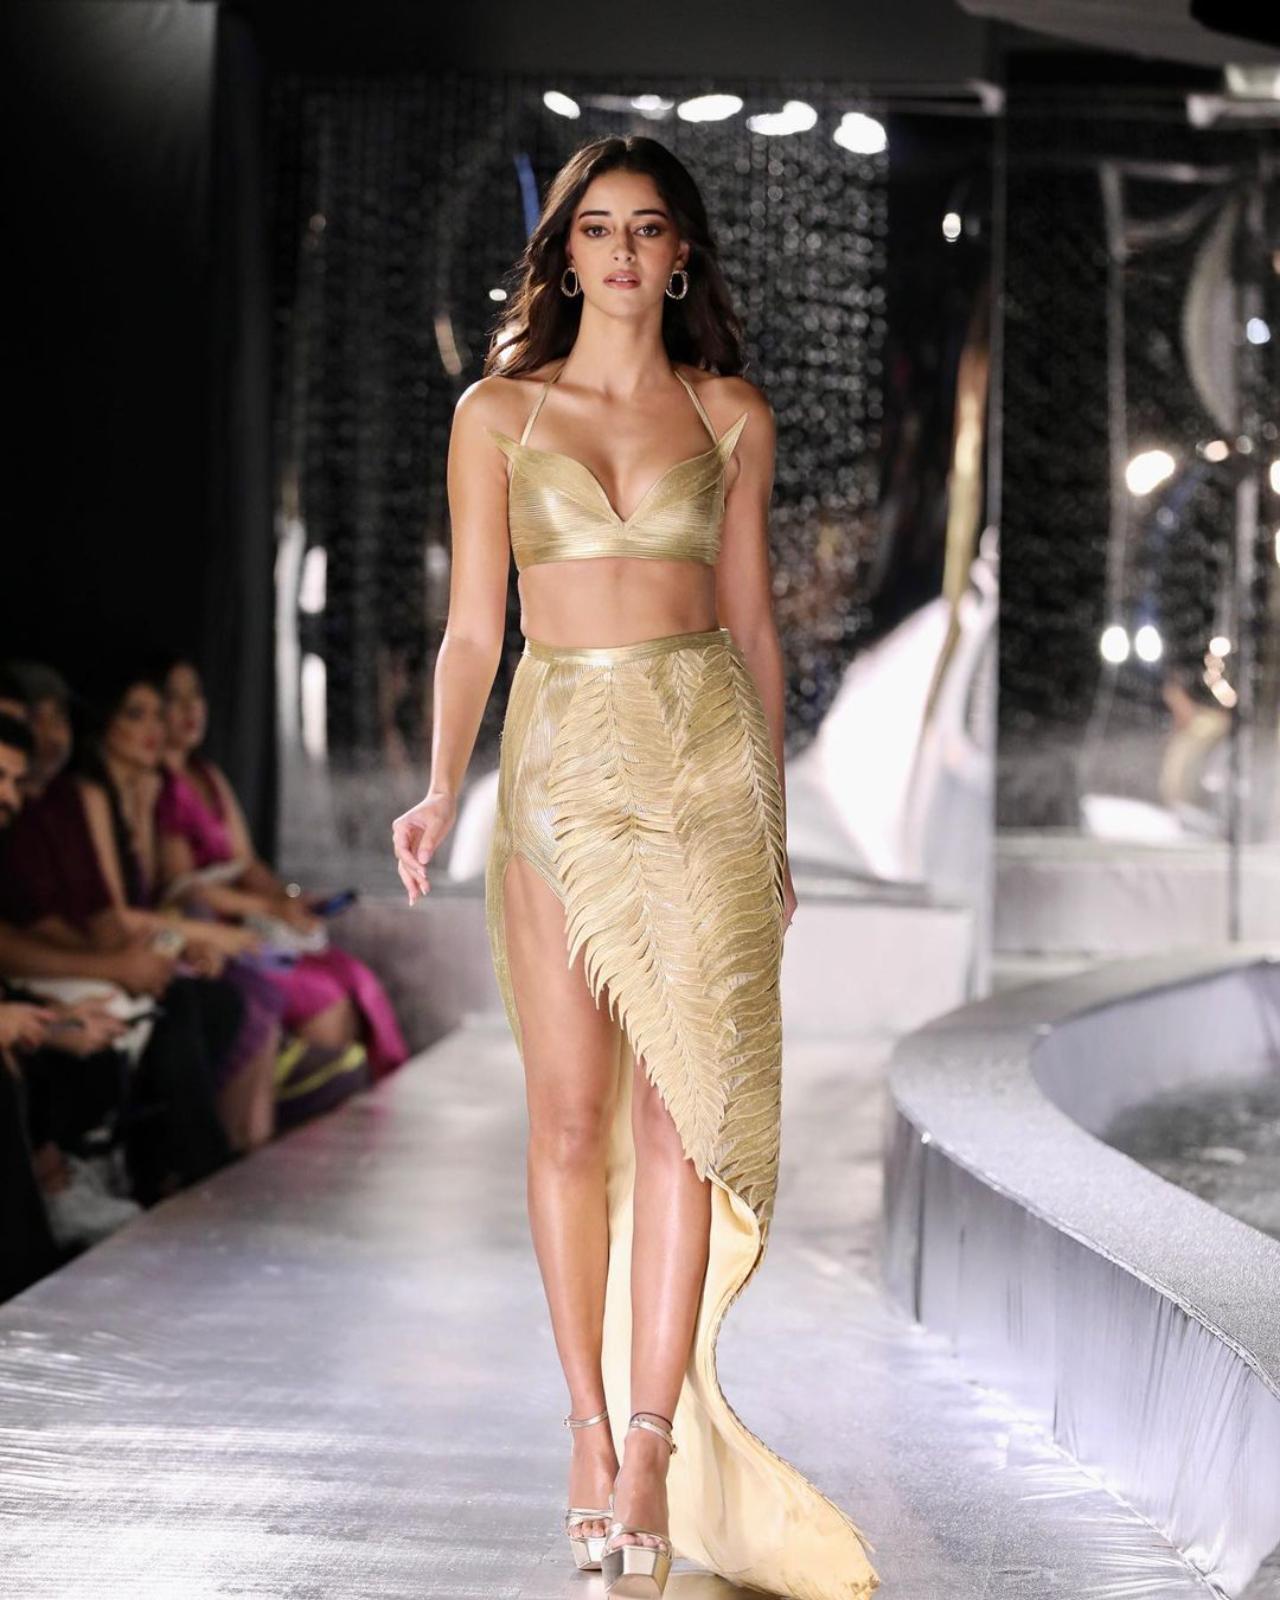 Ananya Panday evoked hushed reverence through her 'Golden Bird' look for the collection. The unique train at the back of the dress curved in an unusual style, embodying the spirit of water